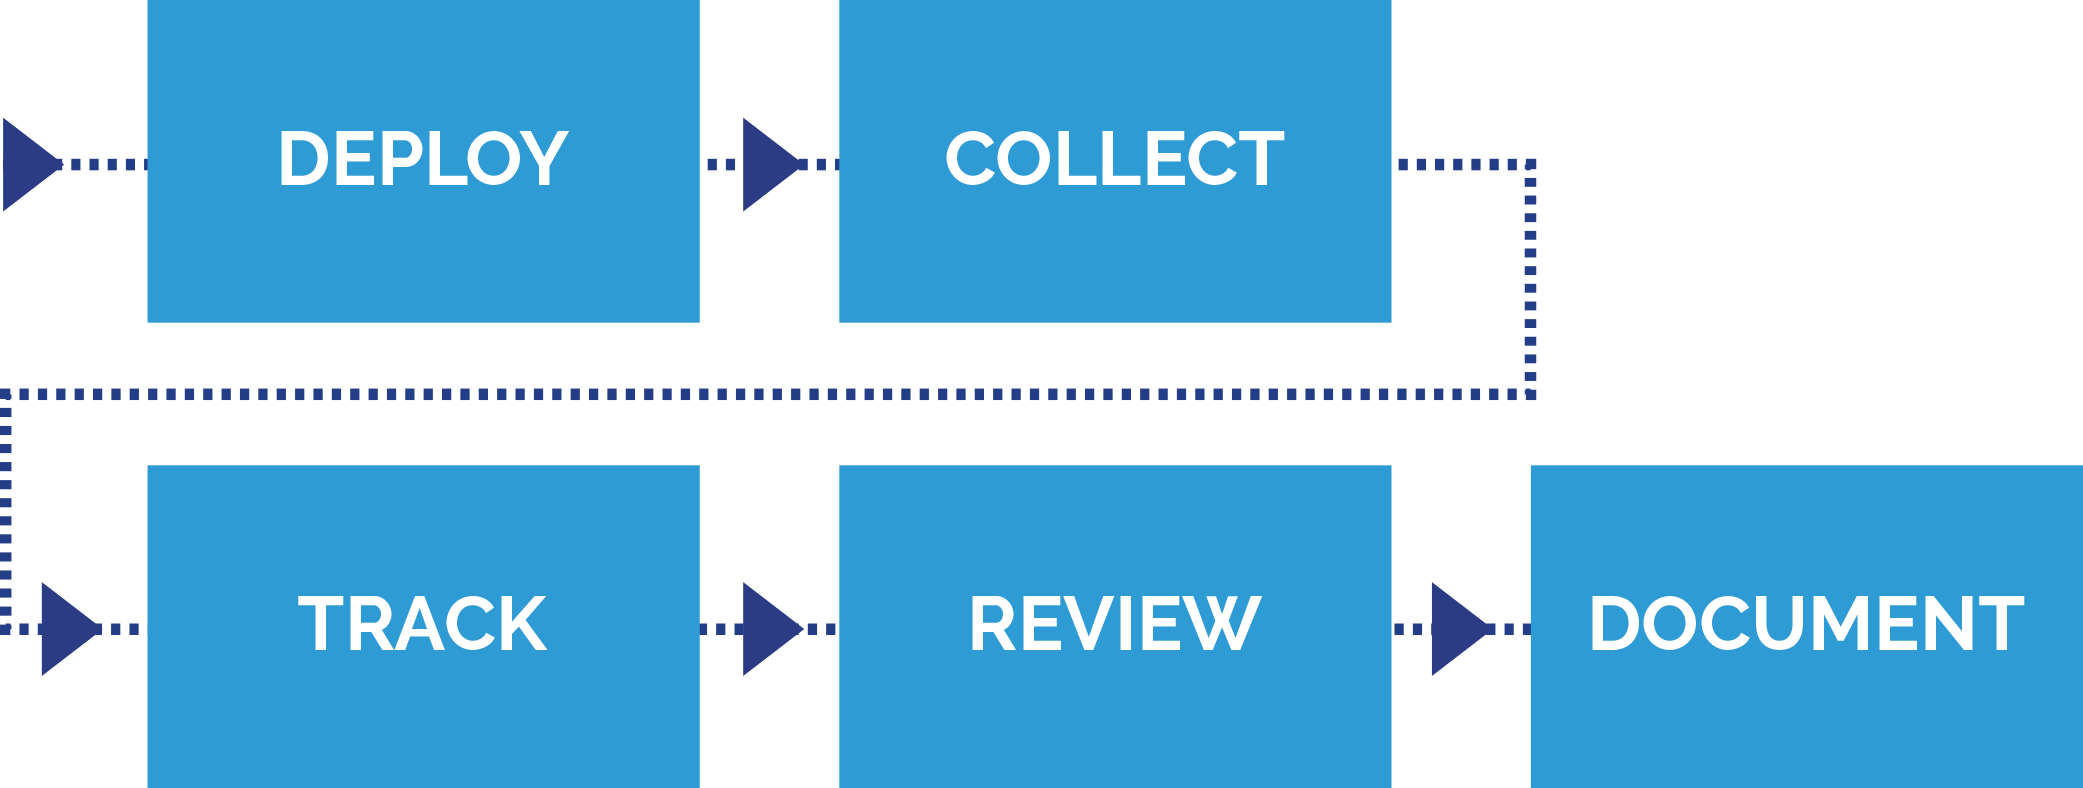 Infographic showing blue boxes with white sans-serif type inside and a dark blue dotted line and arrows connecting the boxes